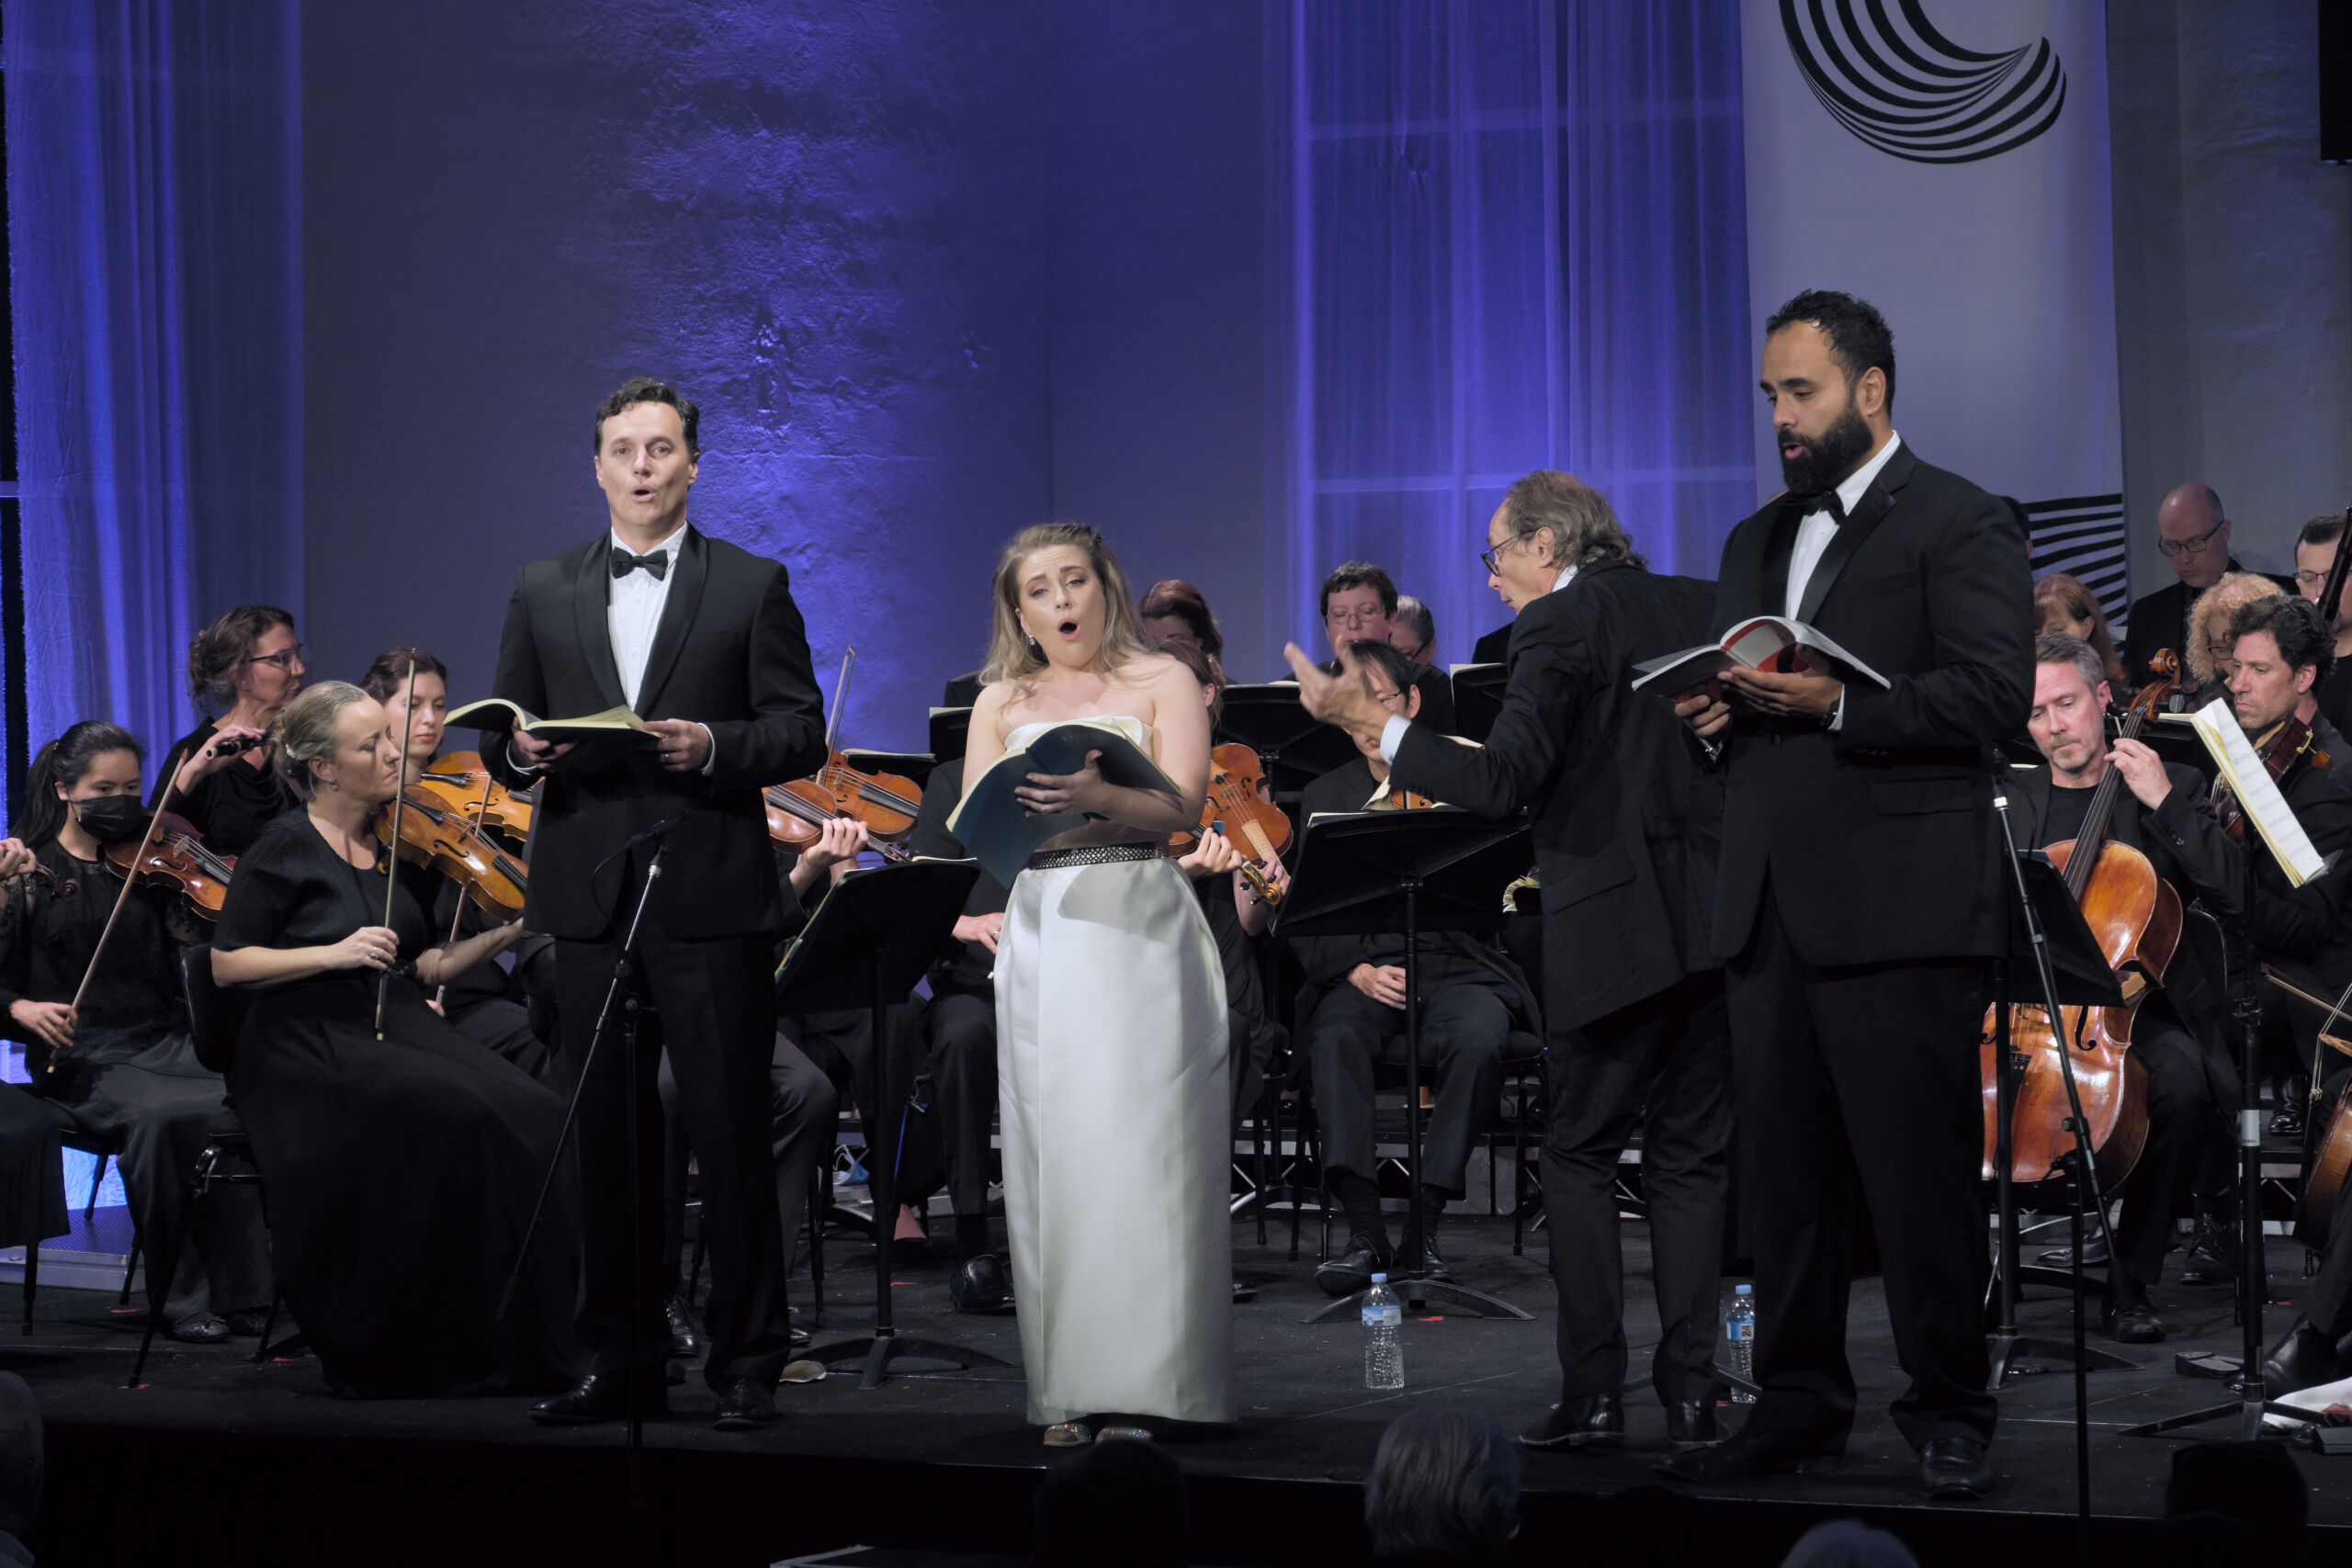 CIMF 2022. Concert 2. <i>Creation</i>.  Soloists Andrew Goodwin, Alexandra Oomens and James Ioelu perform with the Australian Haydn Ensemble and the Sydney Chamber Choir, conducted by Roland Peelman.  Photo by Peter Hislop.” width=”2560″ height=”1707″ srcset=”https://limelightmagazine.com.au/wp-content/uploads/2022/04/20220429d-014-Con02-Creation-rushes-scaled .jpg 2560w, https://limelightmagazine.com.au/wp-content/uploads/2022/04/20220429d-014-Con02-Creation-rushes-300×200.jpg 300w, https://limelightmagazine.com.au/wp -content/uploads/2022/04/20220429d-014-Con02-Creation-rushes-1024×683.jpg 1024w, https://limelightmagazine.com.au/wp-content/uploads/2022/04/20220429d-014-Con02- Creation-rushes-768×512.jpg 768w, https://limelightmagazine.com.au/wp-content/uploads/2022/04/20220429d-014-Con02-Creation-rushes-1536×1024.jpg 1536w, https://limelightmagazine. com.au/wp-content/uploads/2022/04/20220429d-014-Con02-Creation-rushes-2048×1365.jpg 2048w” sizes=”(max-width: 2560px) 100vw, 2560px”/></p>
<p id=